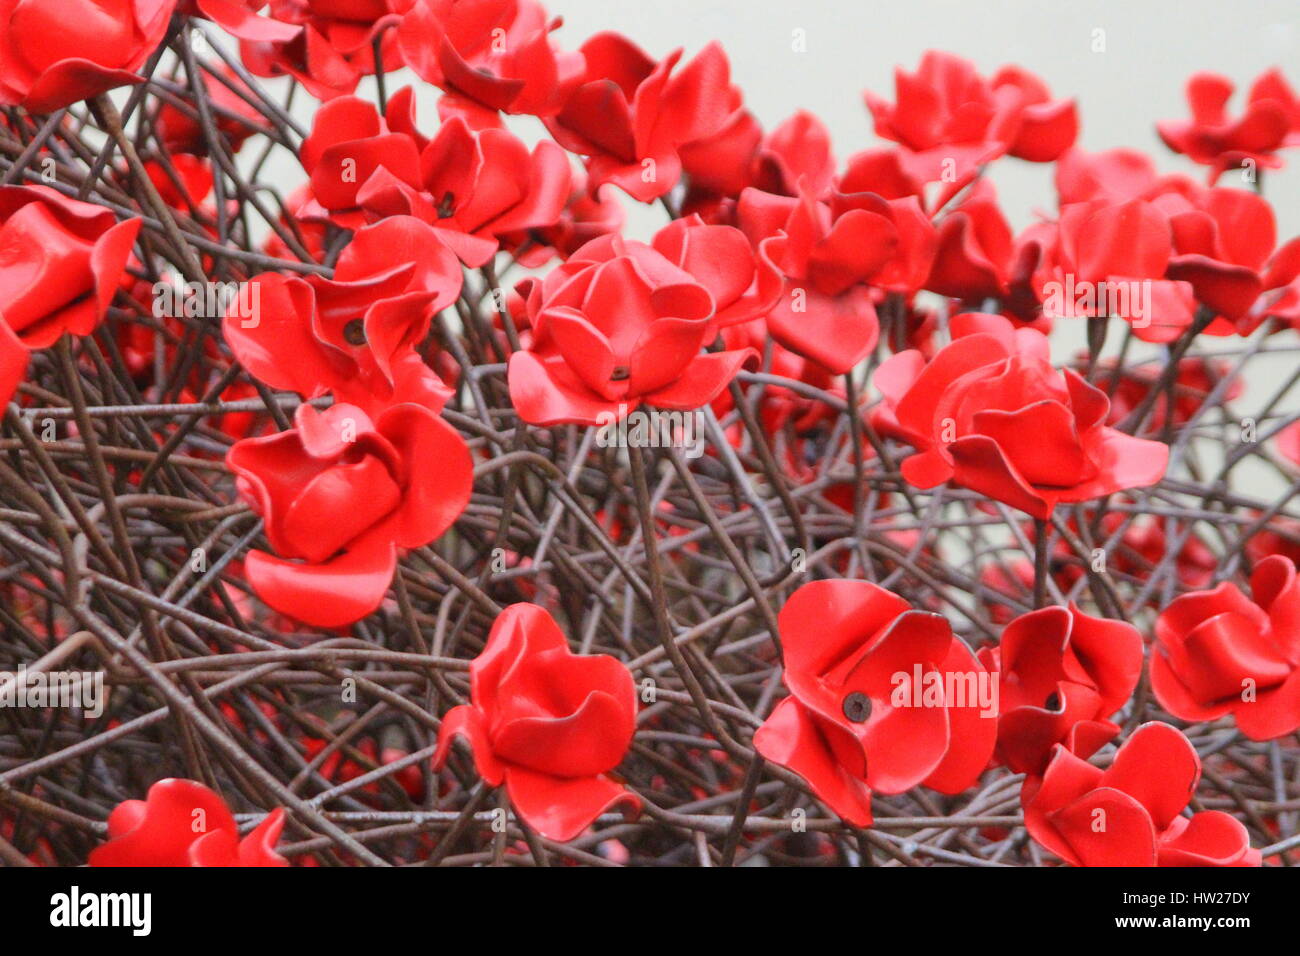 The Tower of London Poppies on display at Yorkshire Sculpture Park, Wakefield 2015. The 1914-1918 project WAVE Stock Photo